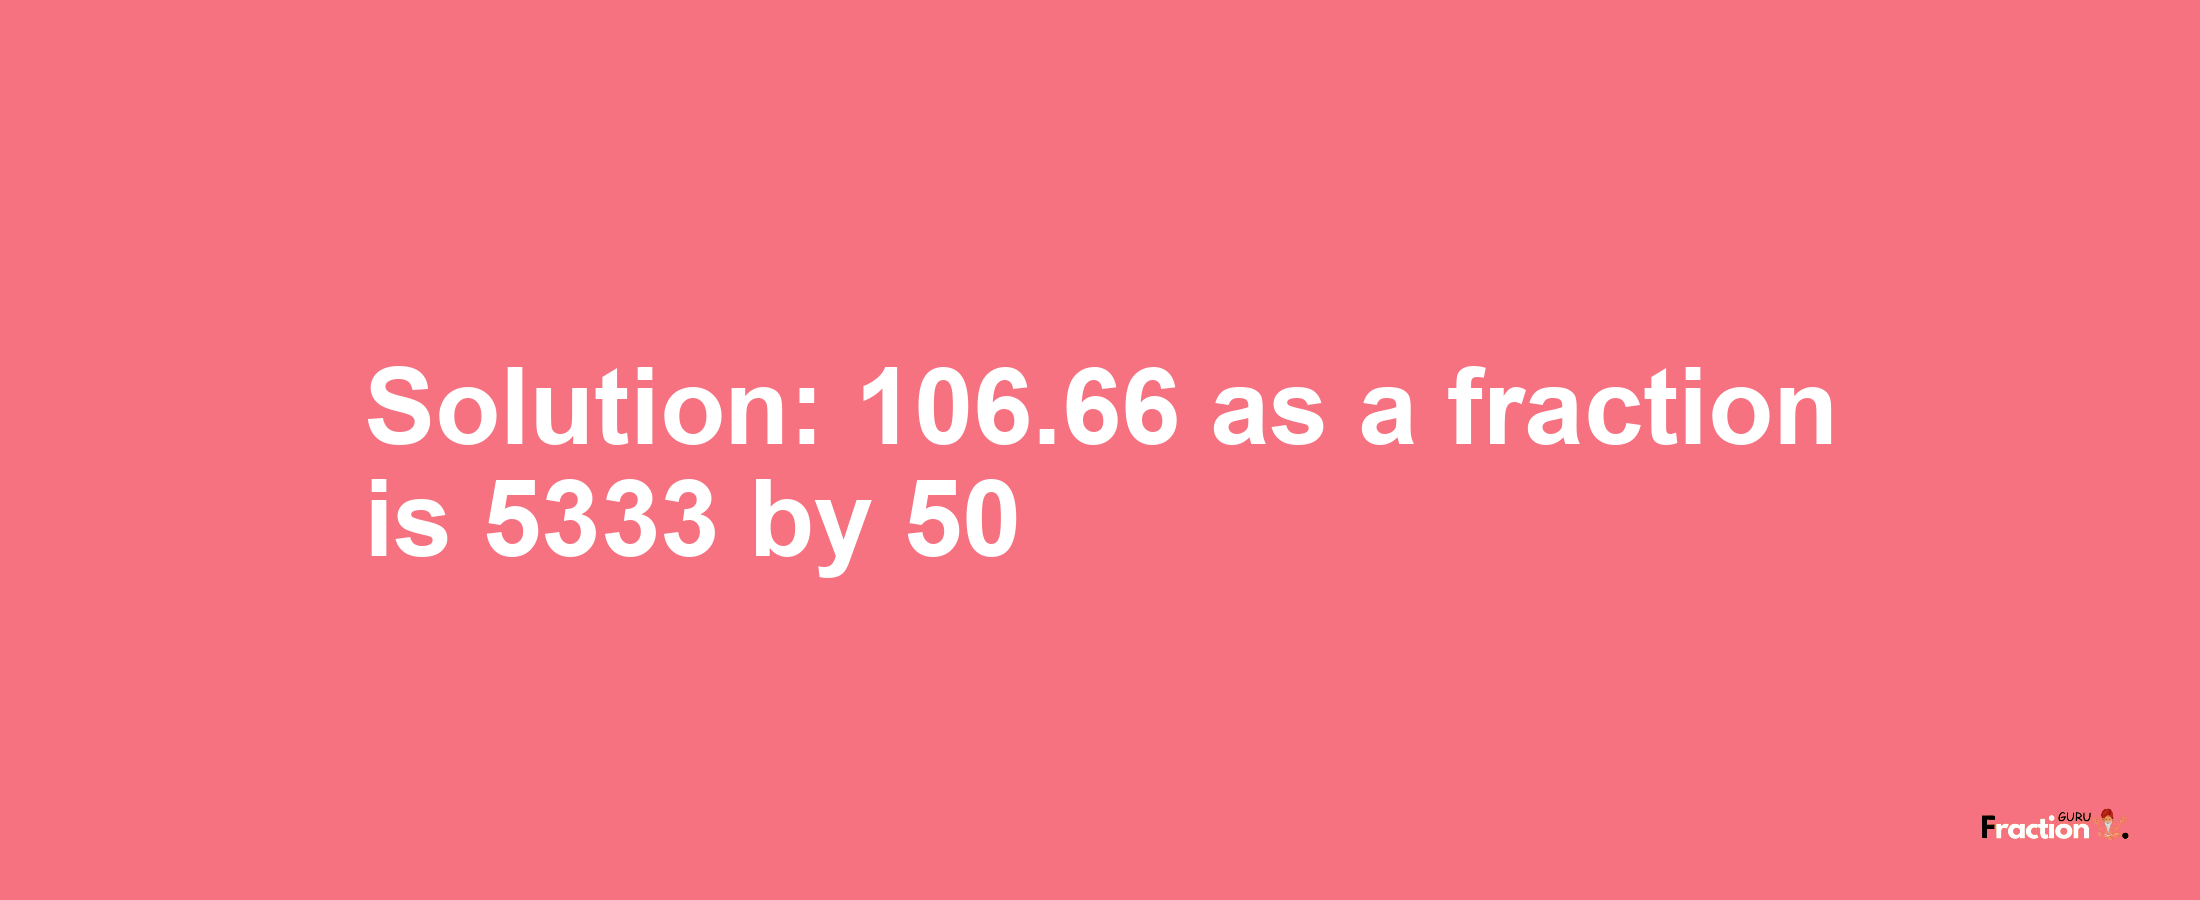 Solution:106.66 as a fraction is 5333/50